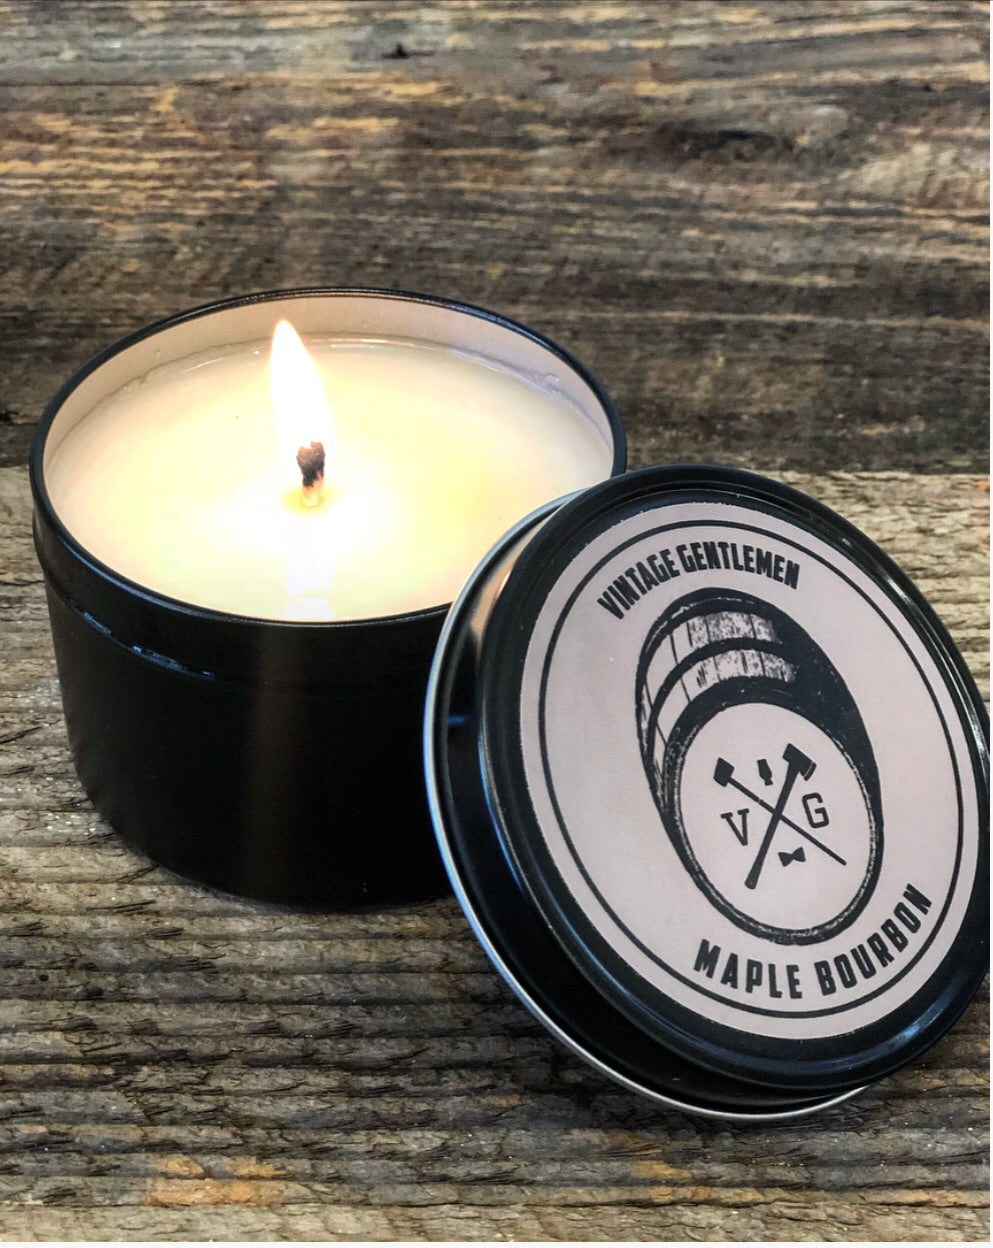 “Maple Bourbon” Soy Candle